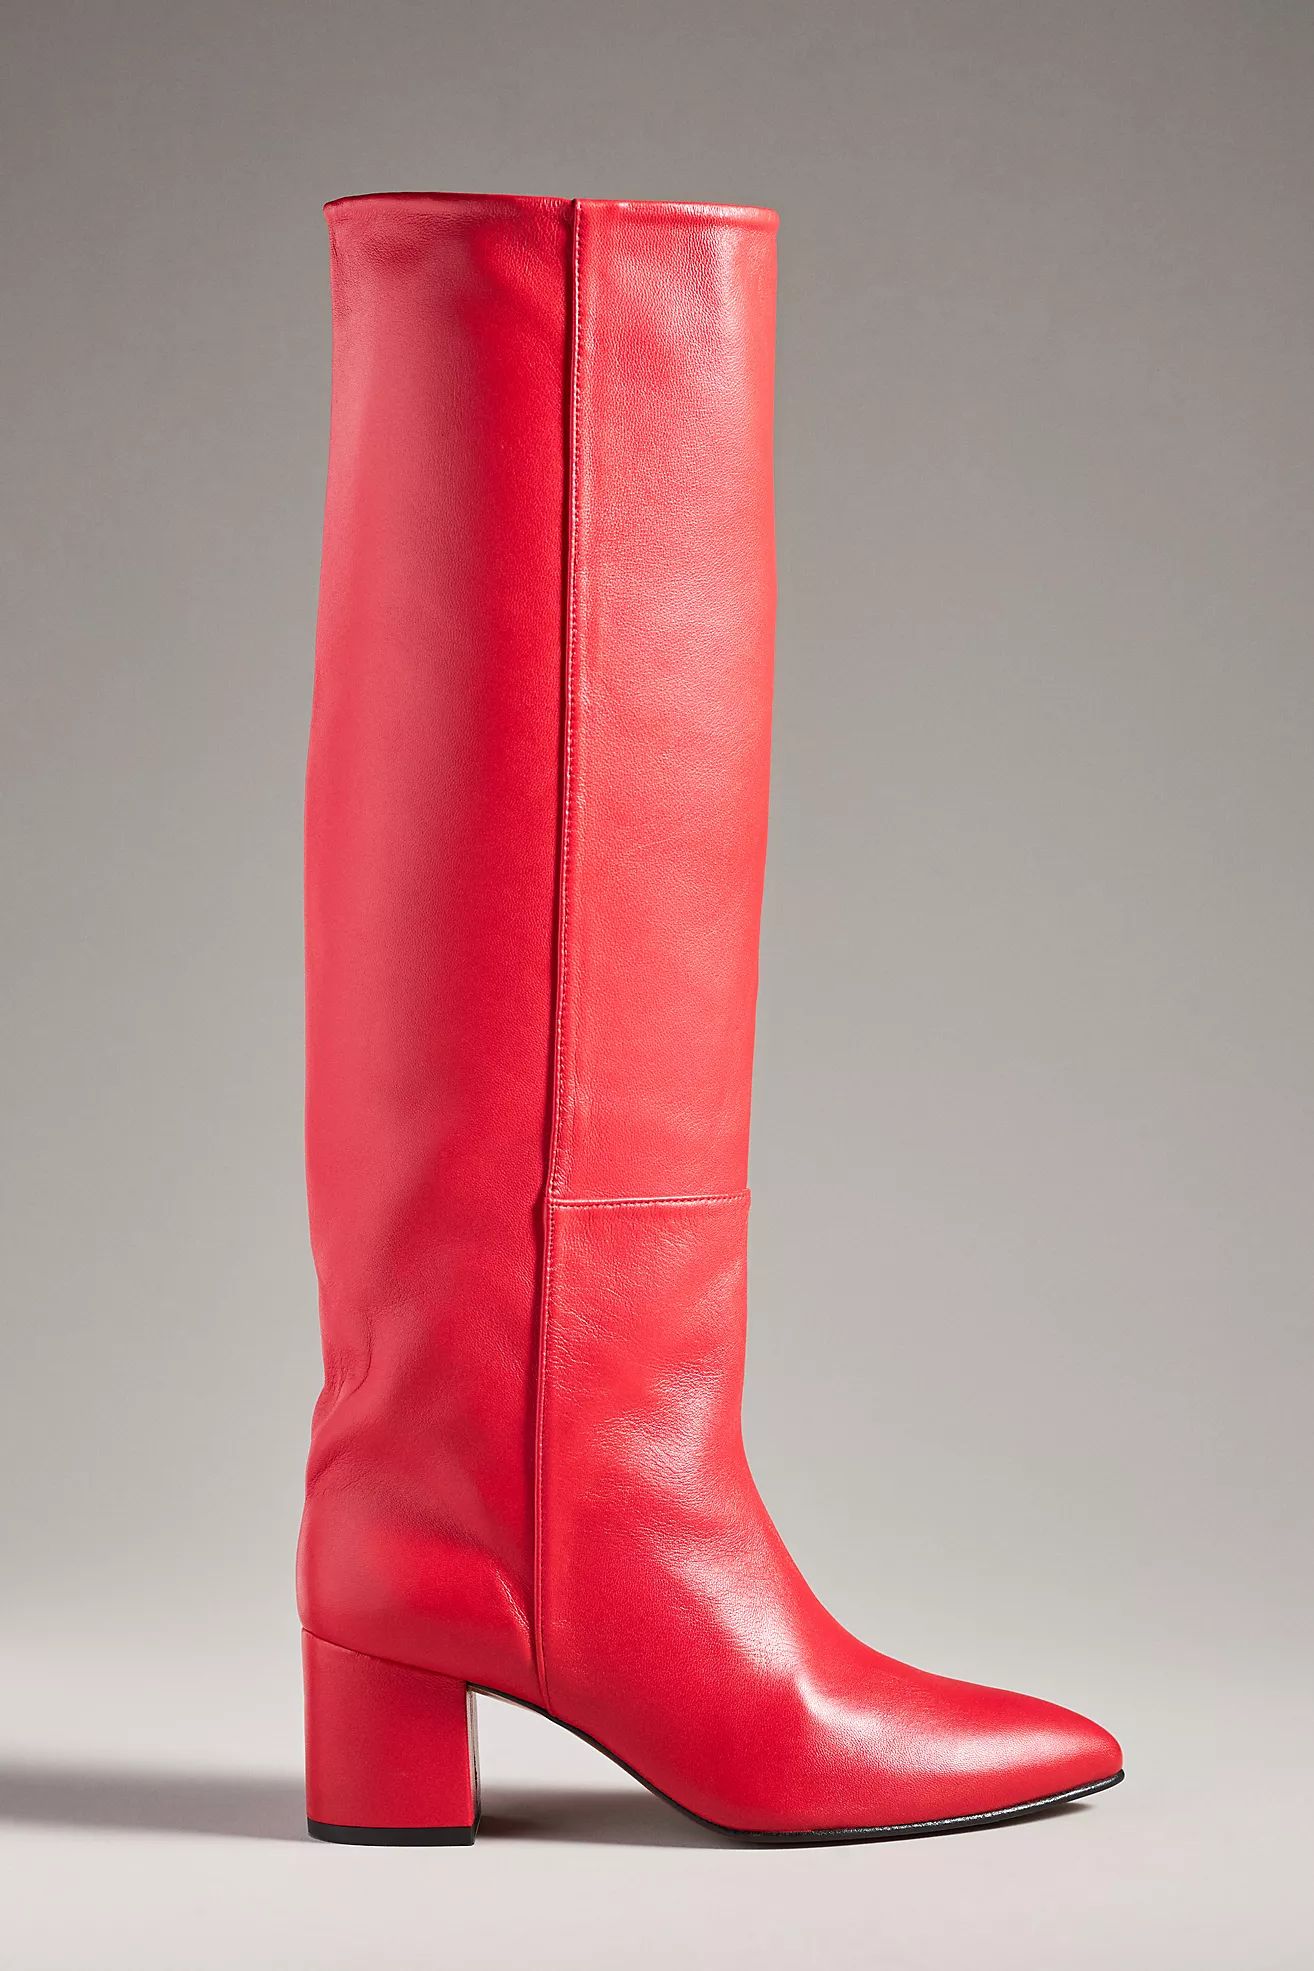 Toral 12776 Tall Boots | Anthropologie (US)